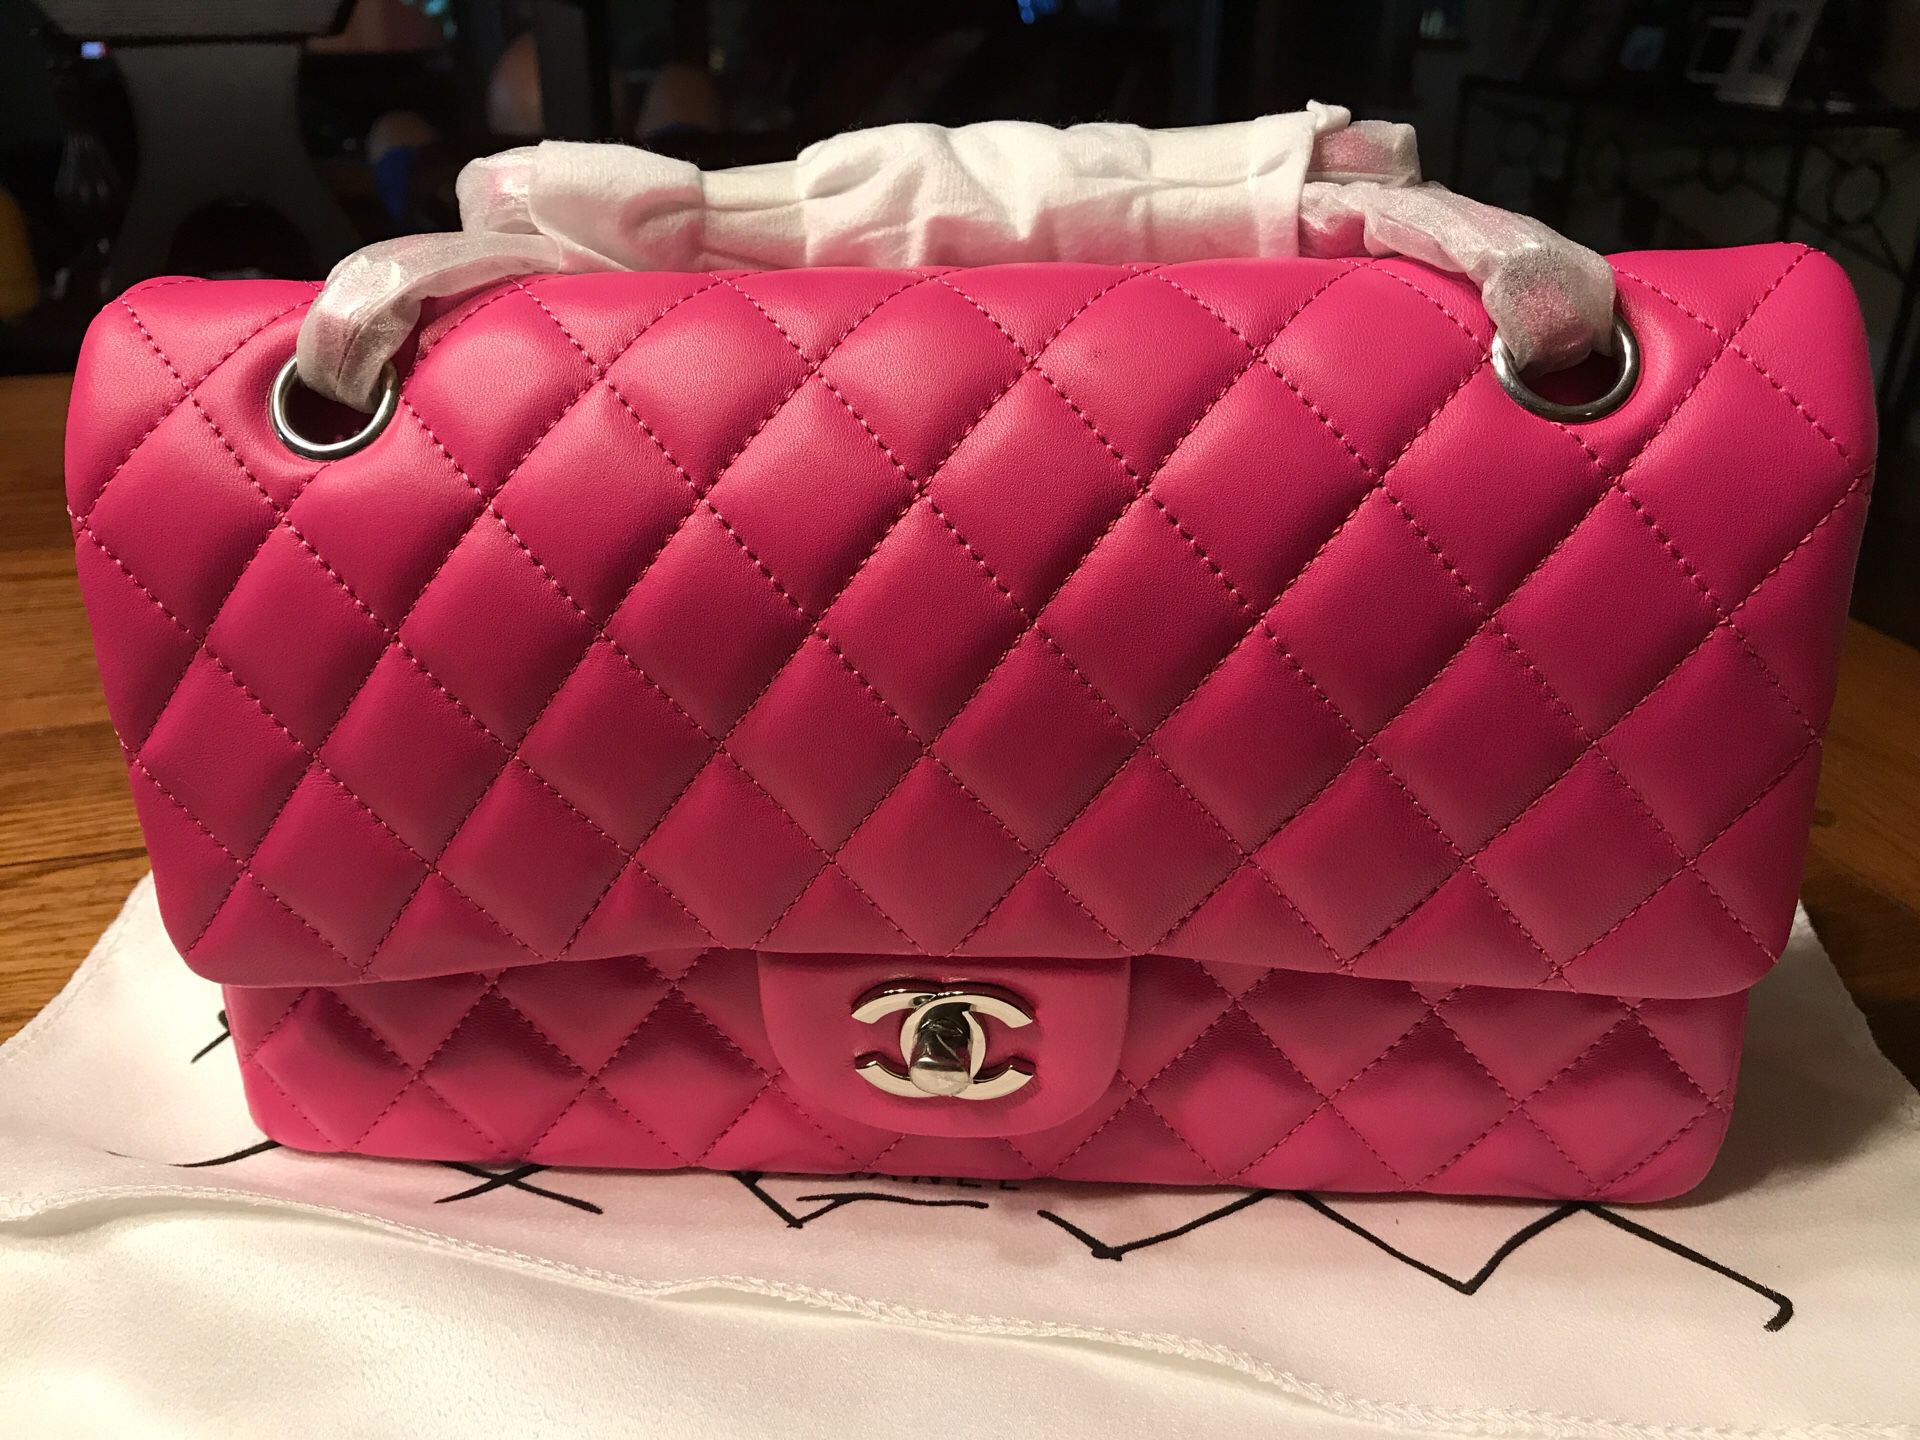 Chanel Classic Lambskin Double Flap Quilted Medium size Fuchsia / Hot pink  Bag for Sale in Kennesaw, GA - OfferUp